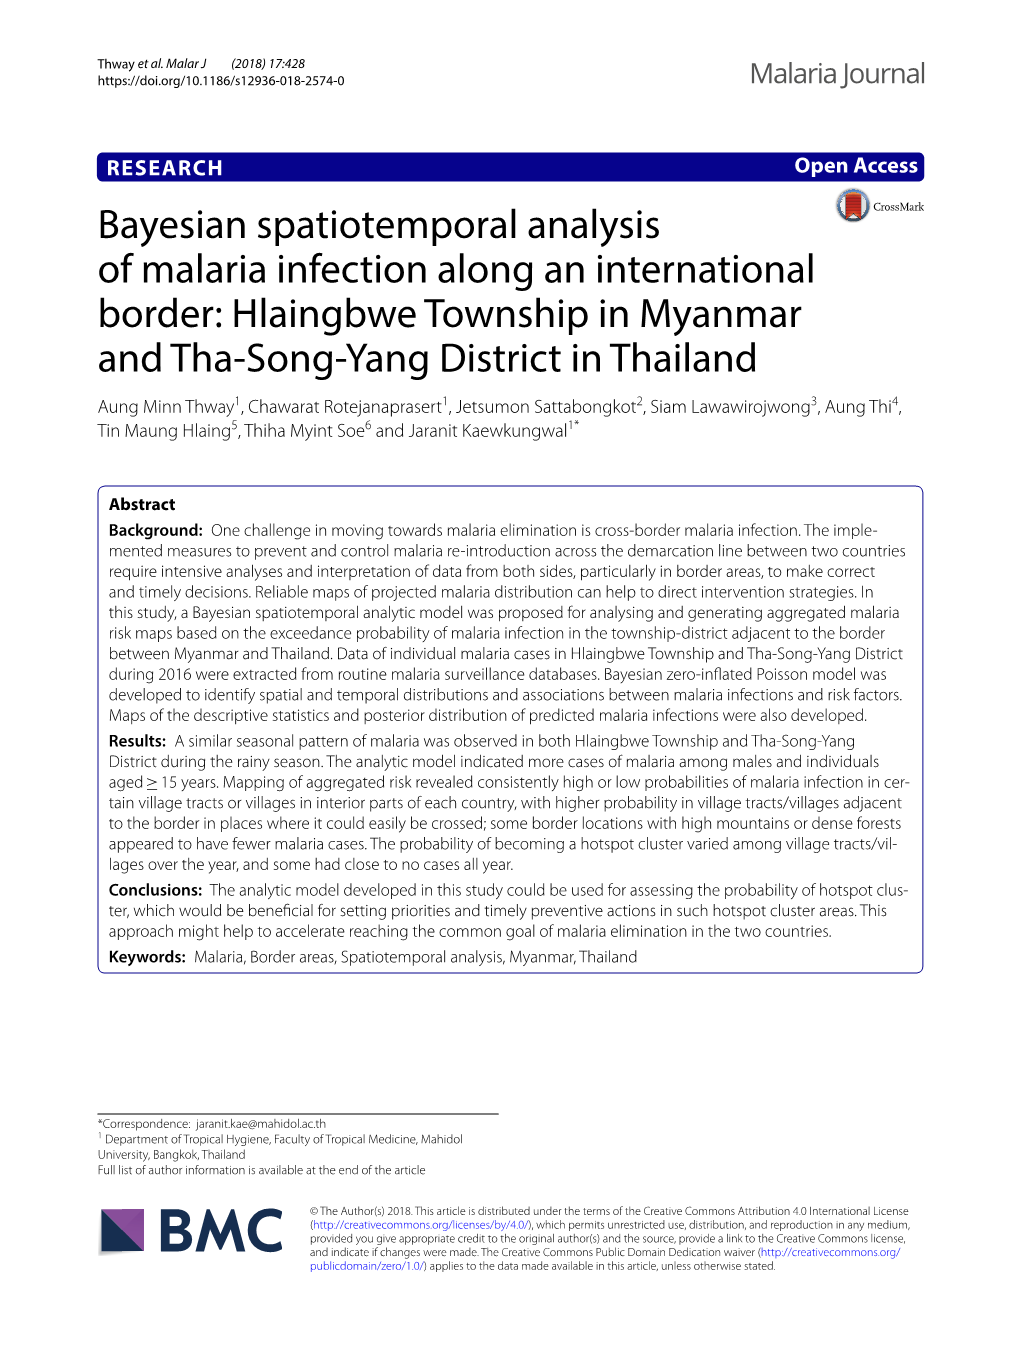 Bayesian Spatiotemporal Analysis of Malaria Infection Along An